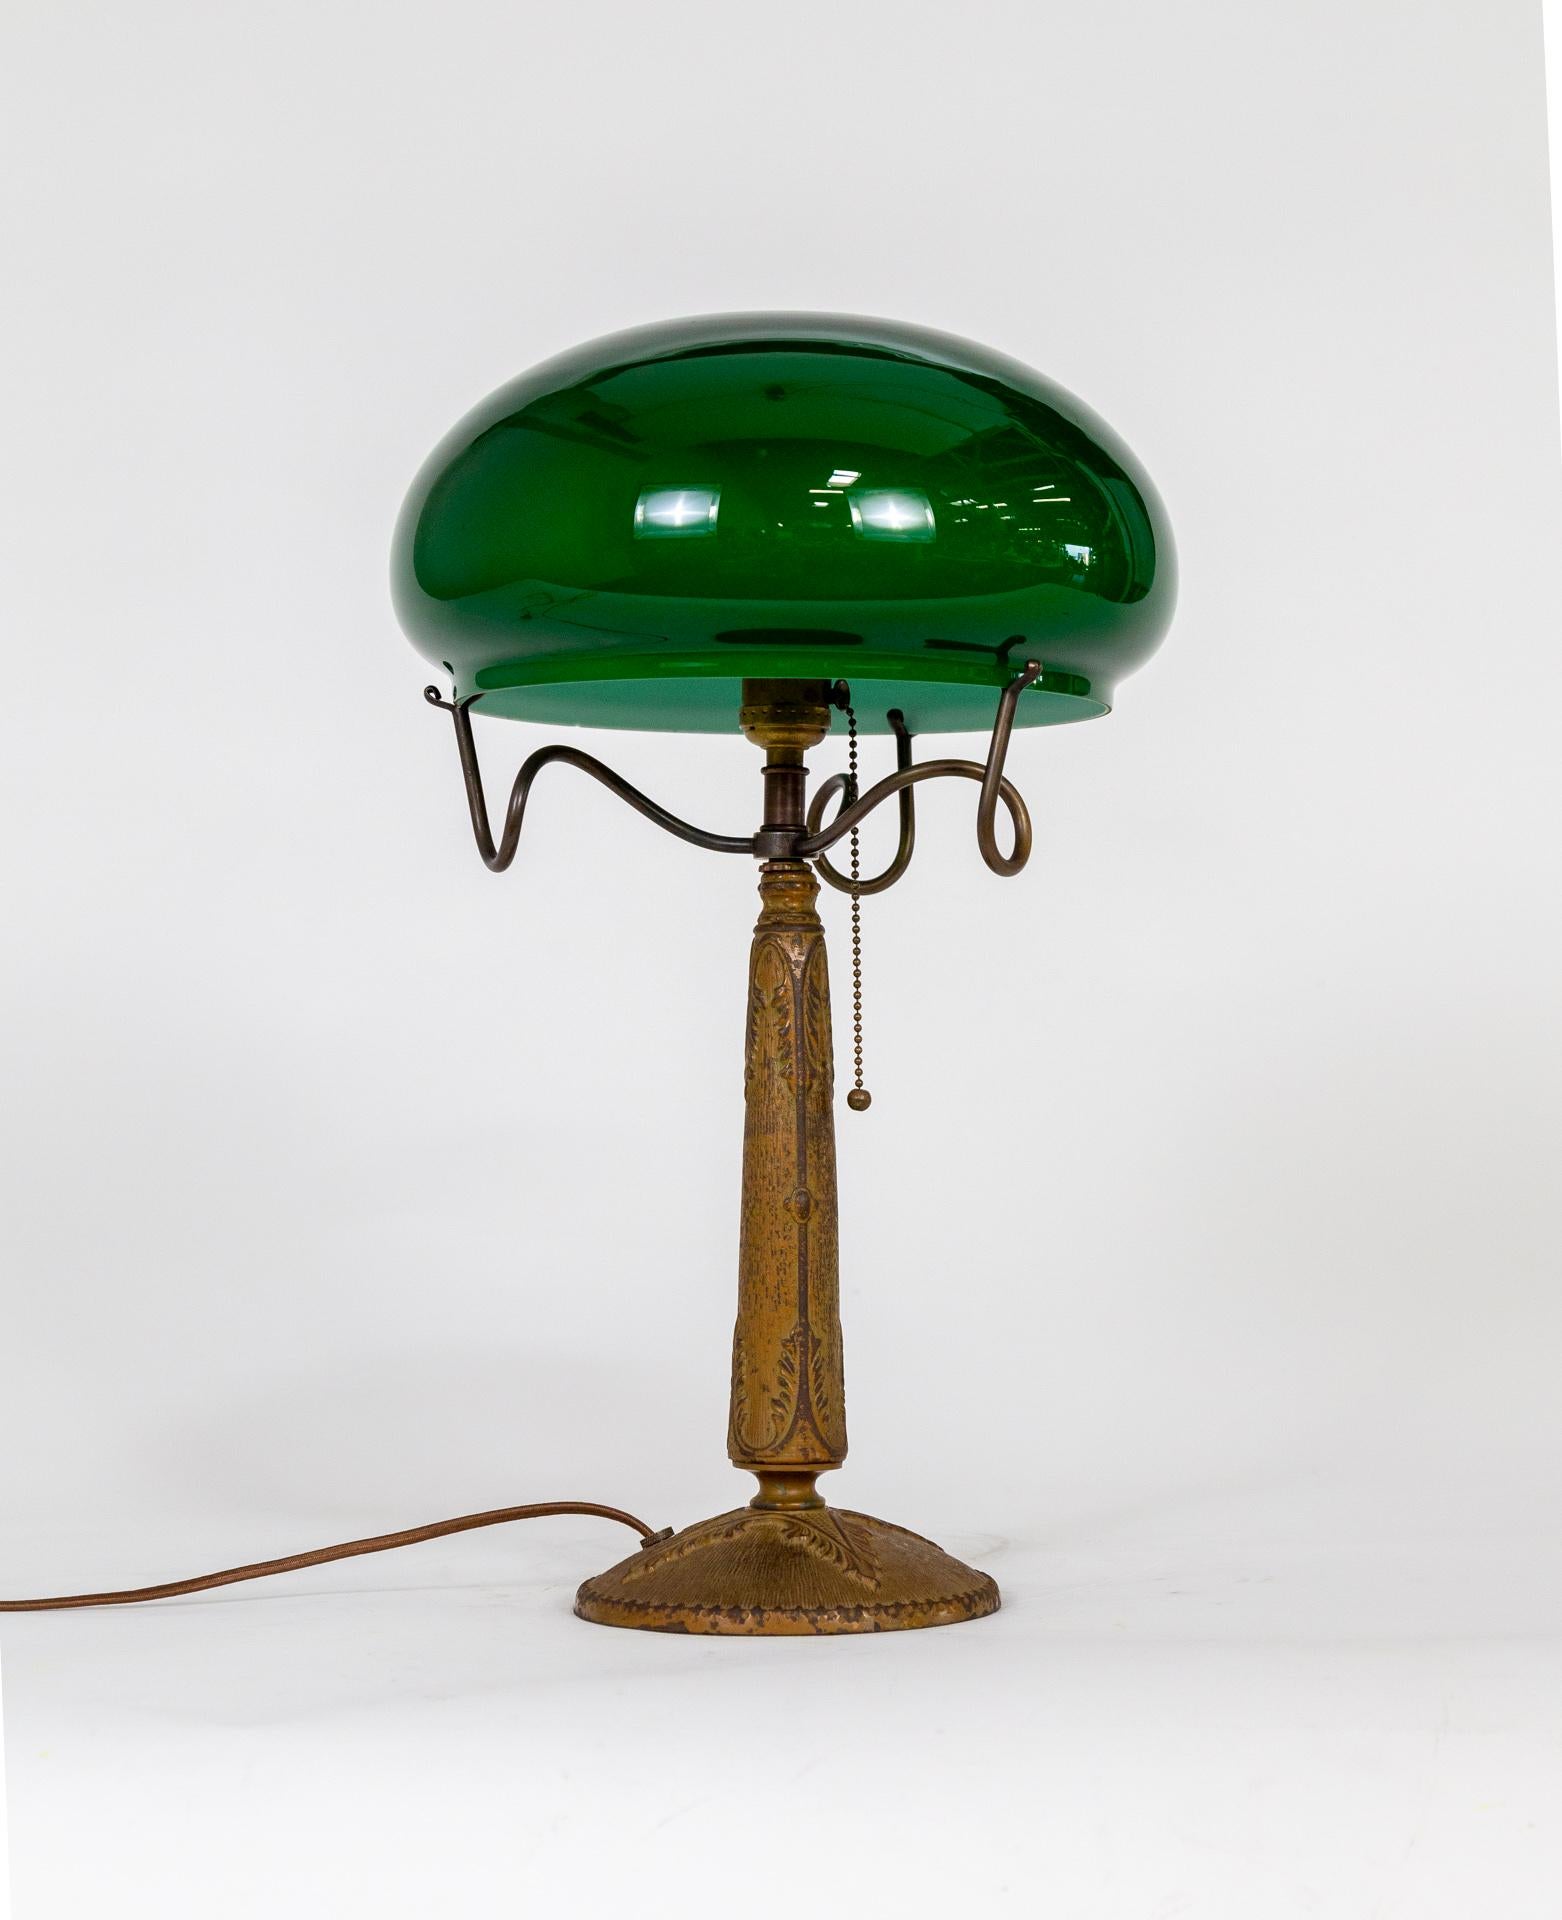 Early 20th Century Textured Cast Metal Nouveau Lamp w/ Green Glass Shade & Curled Shade Holder For Sale